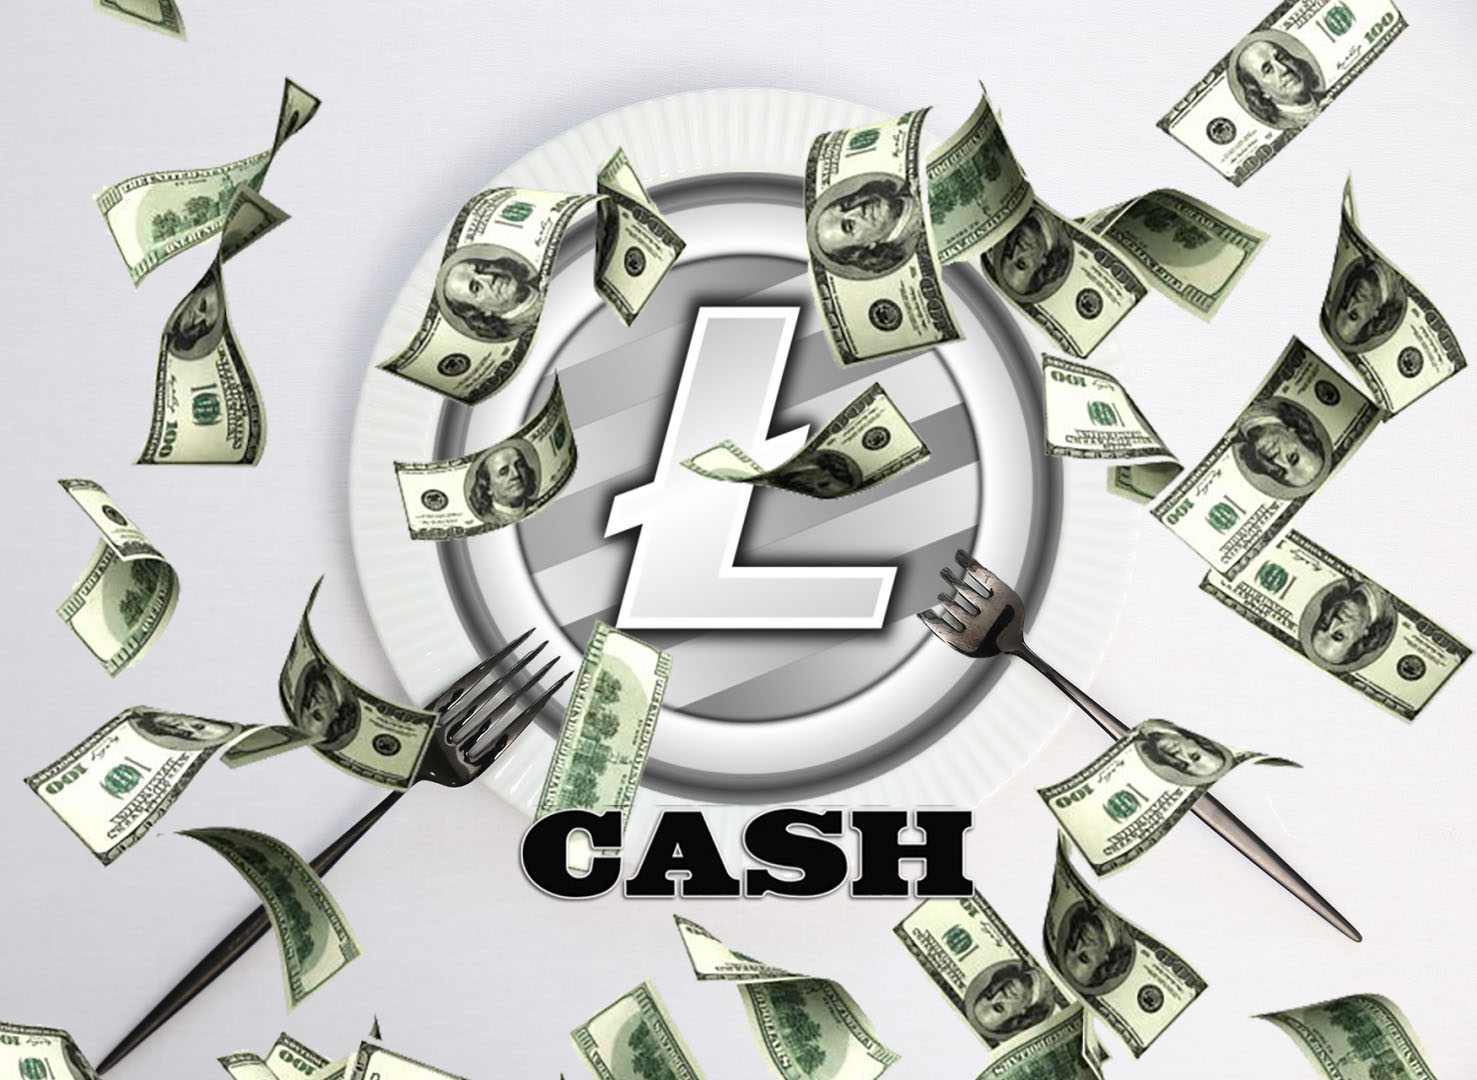 Litecoin Cash – What Is It, How to Get and Where to Buy